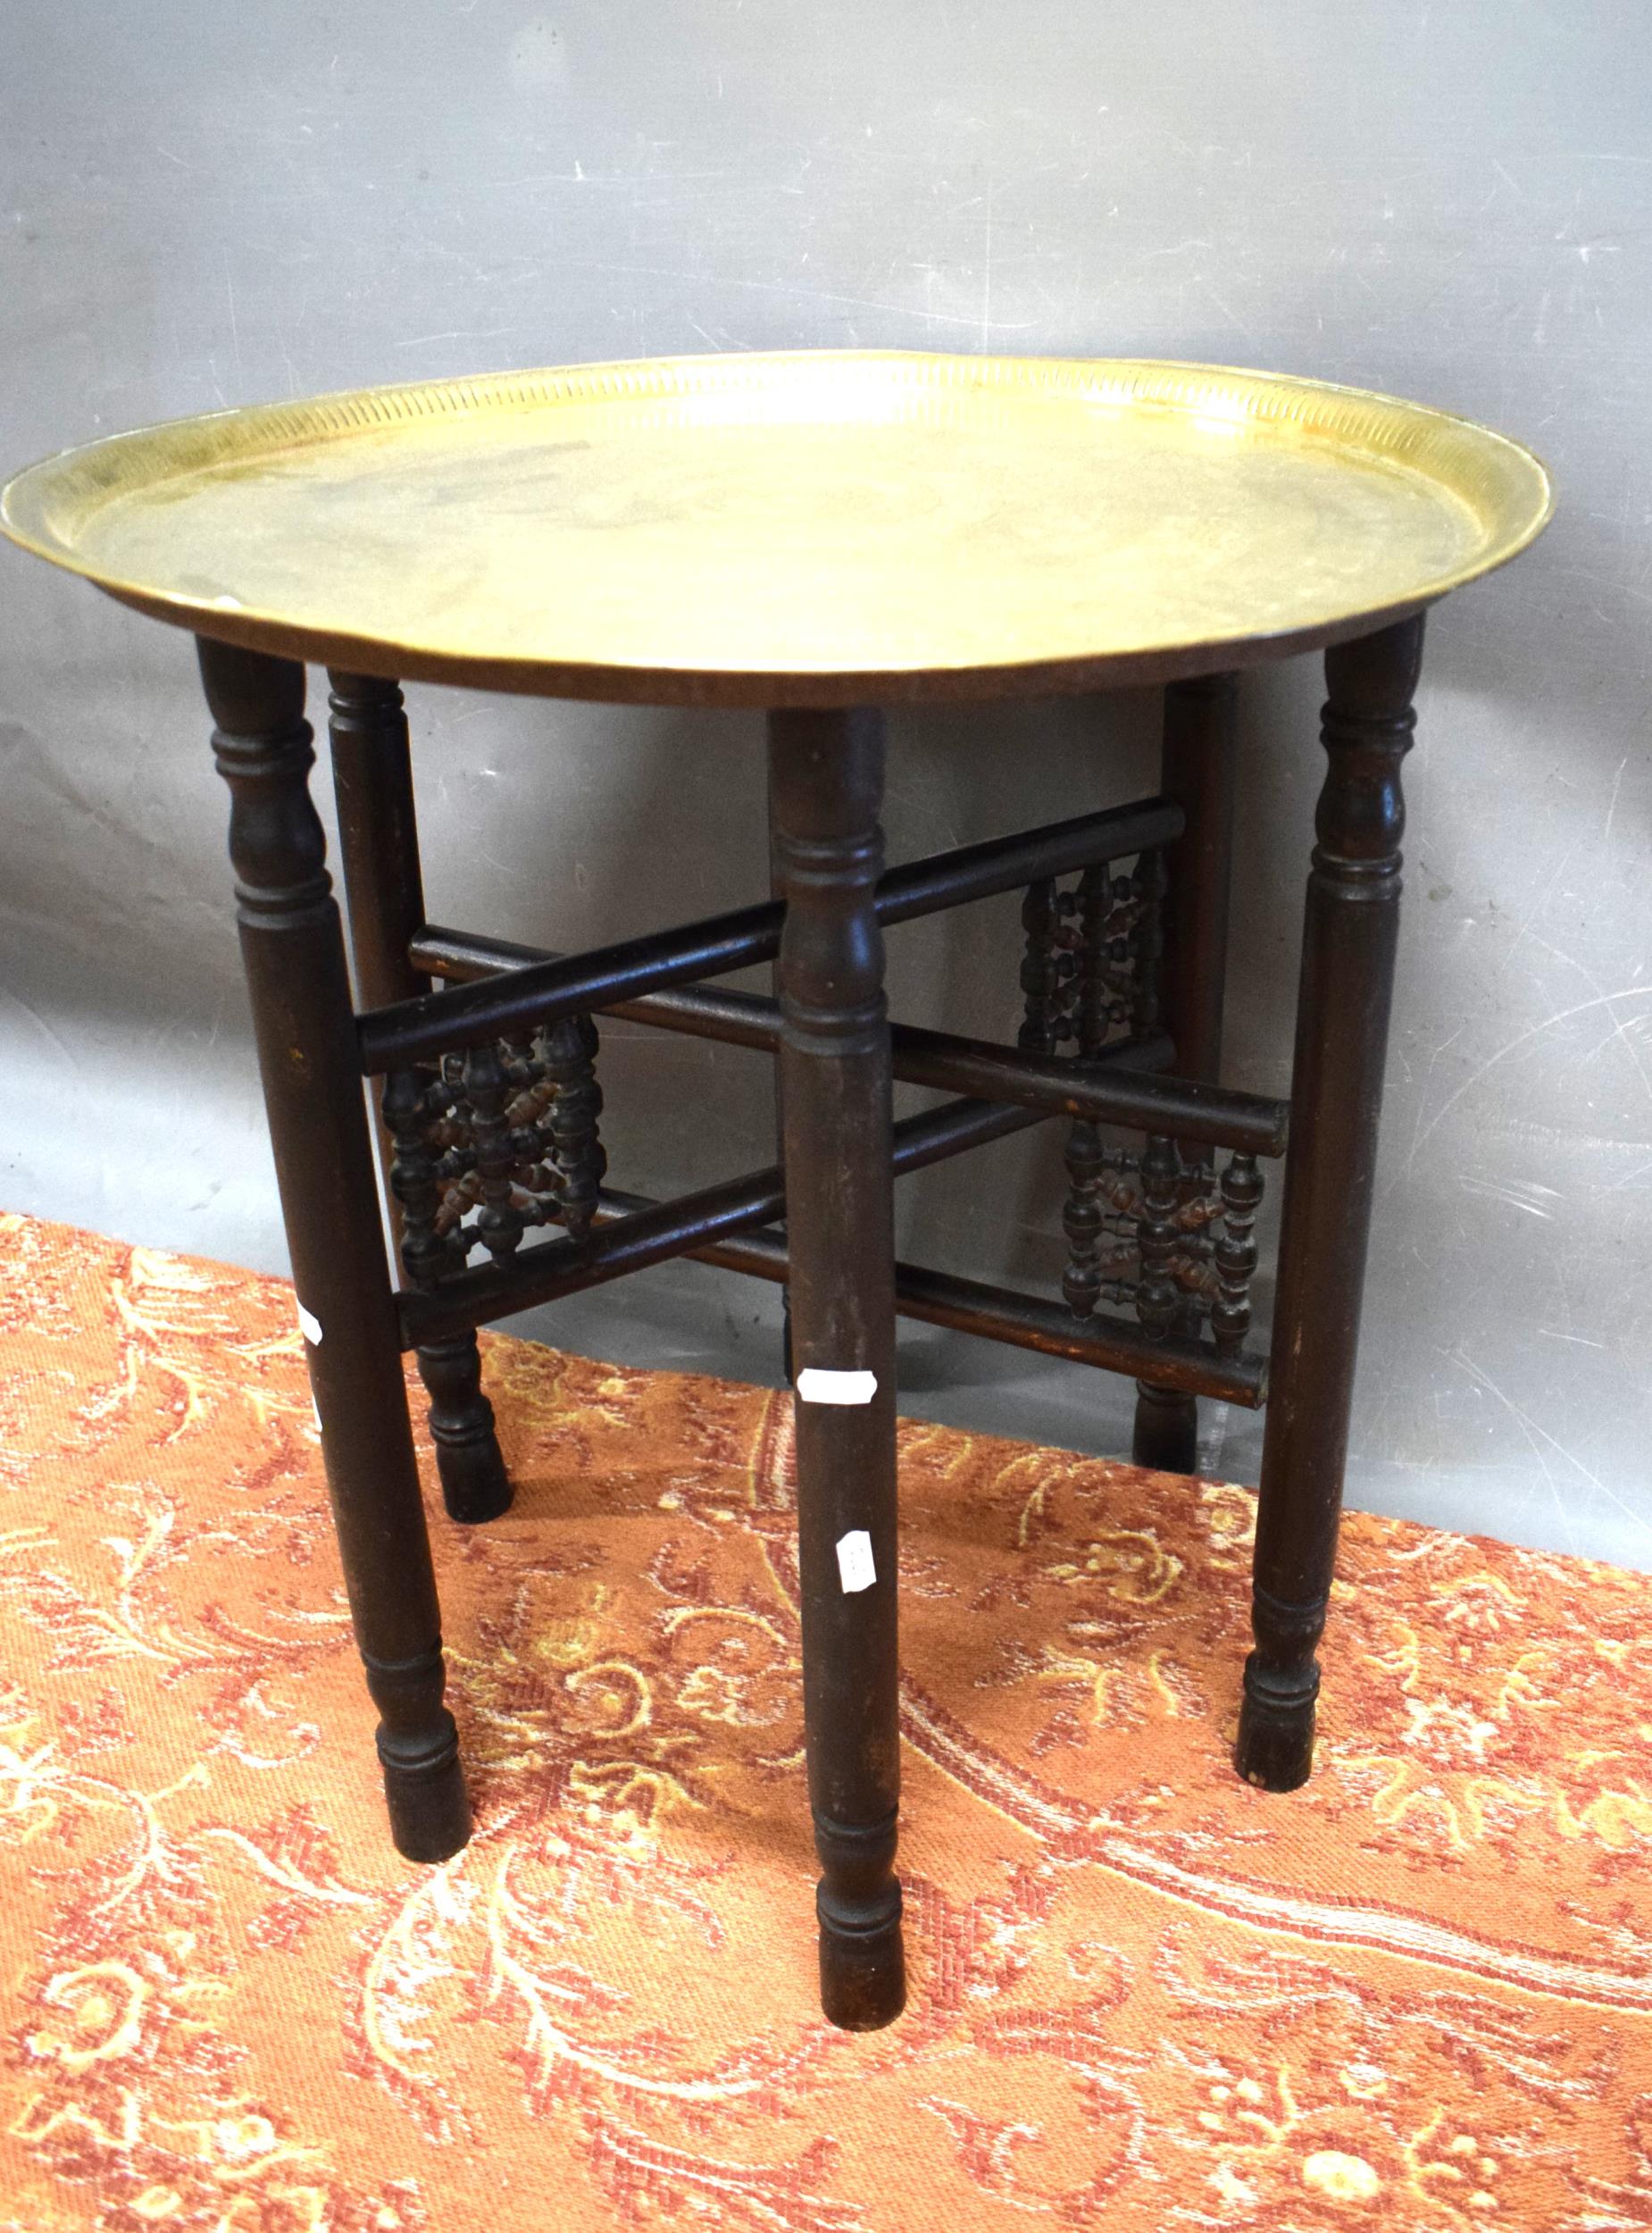 Folding wooden table plus detailed brass top    22 inches tall,  23 inches diameter. See photos.  S2 - Image 2 of 2